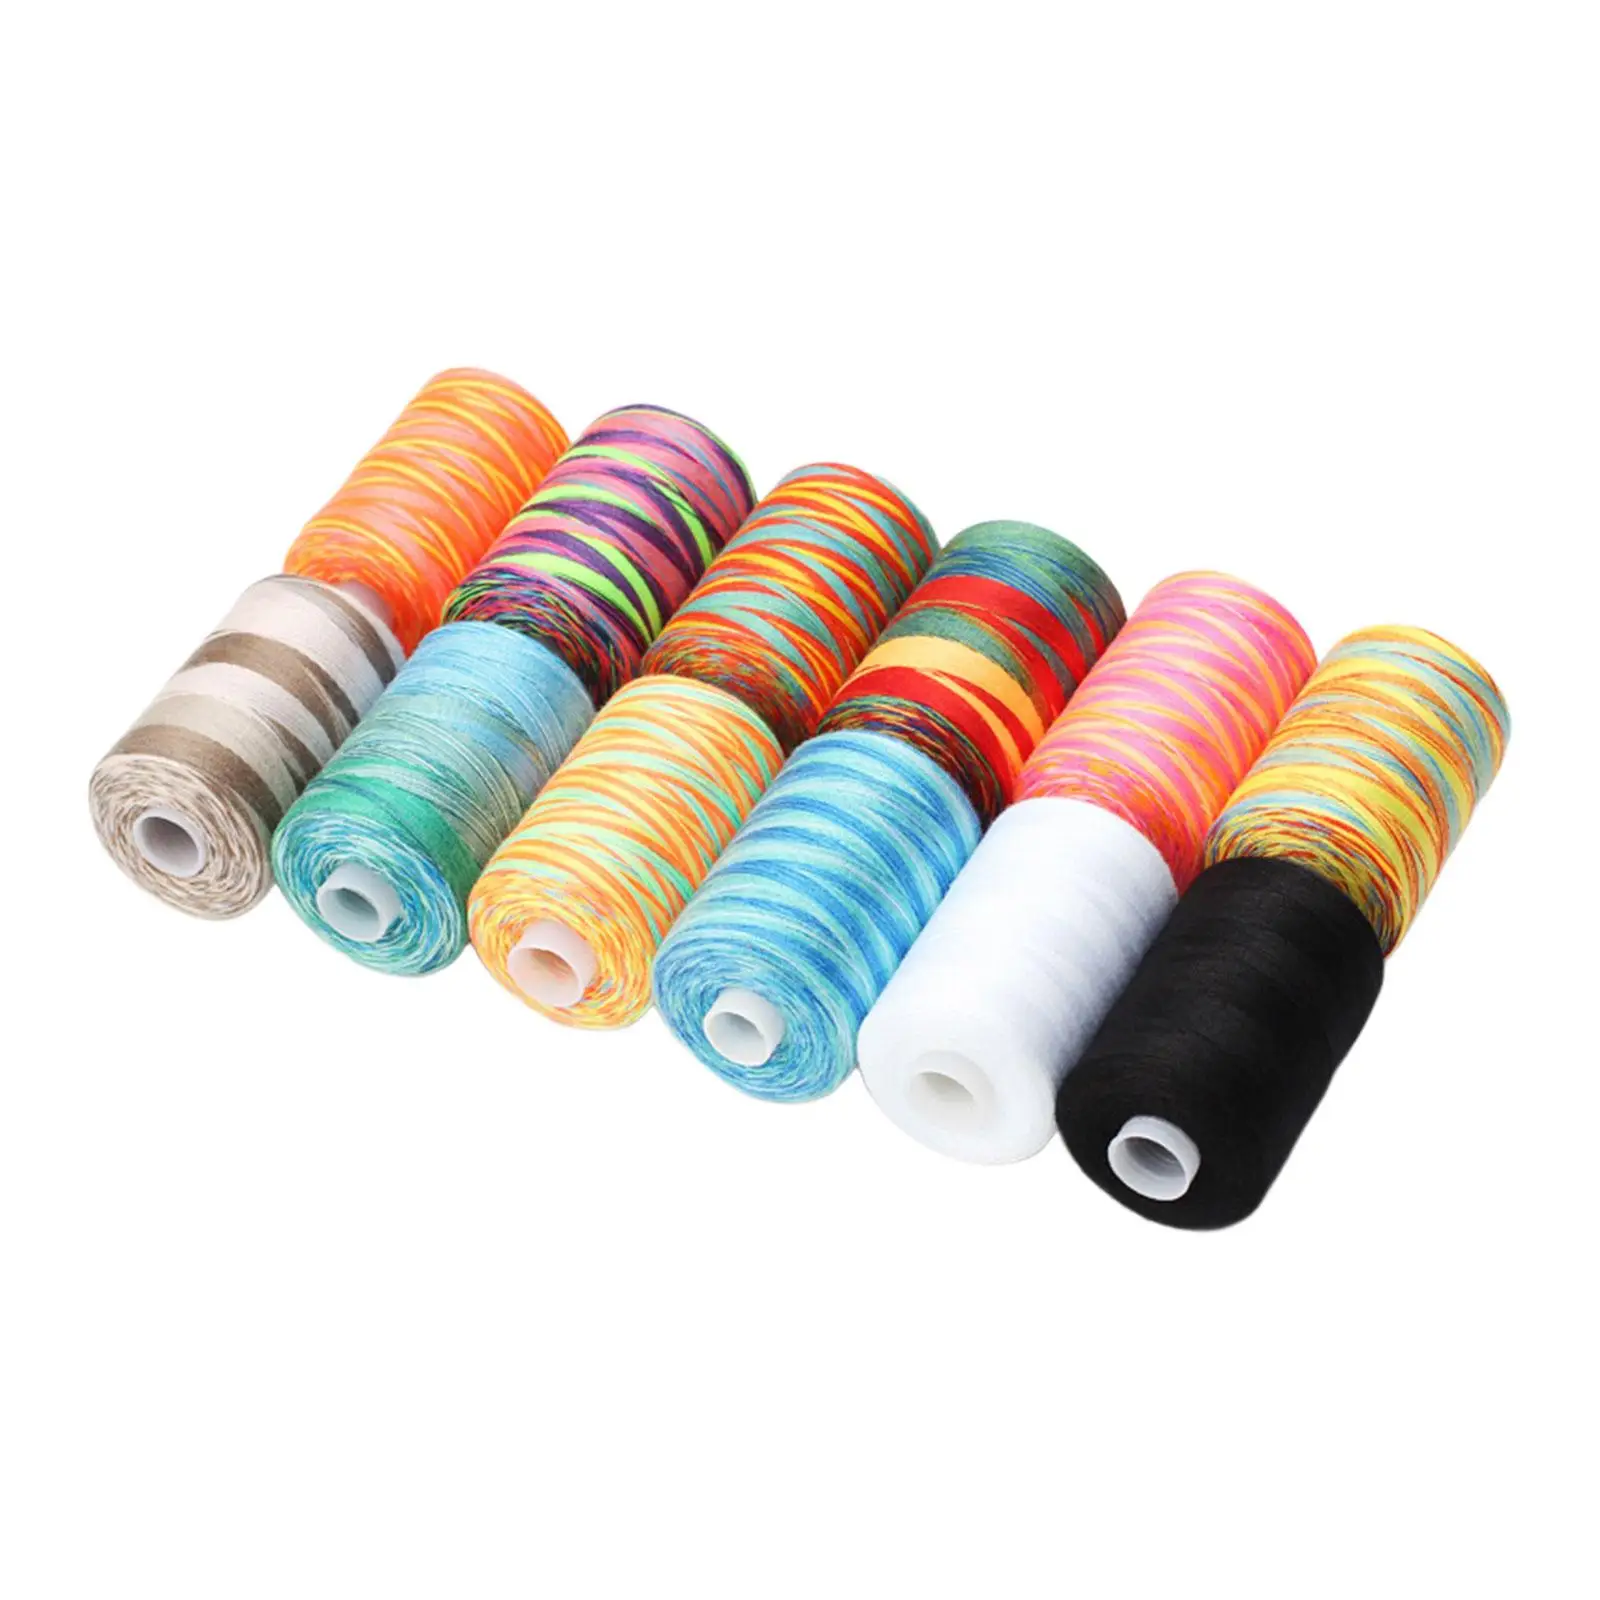 12Pcs Multicolor Sewing Thread Set Durable All Purpose Prewound Bobbin Thread for Sewing Cross Stitching DIY Crafts Supplies